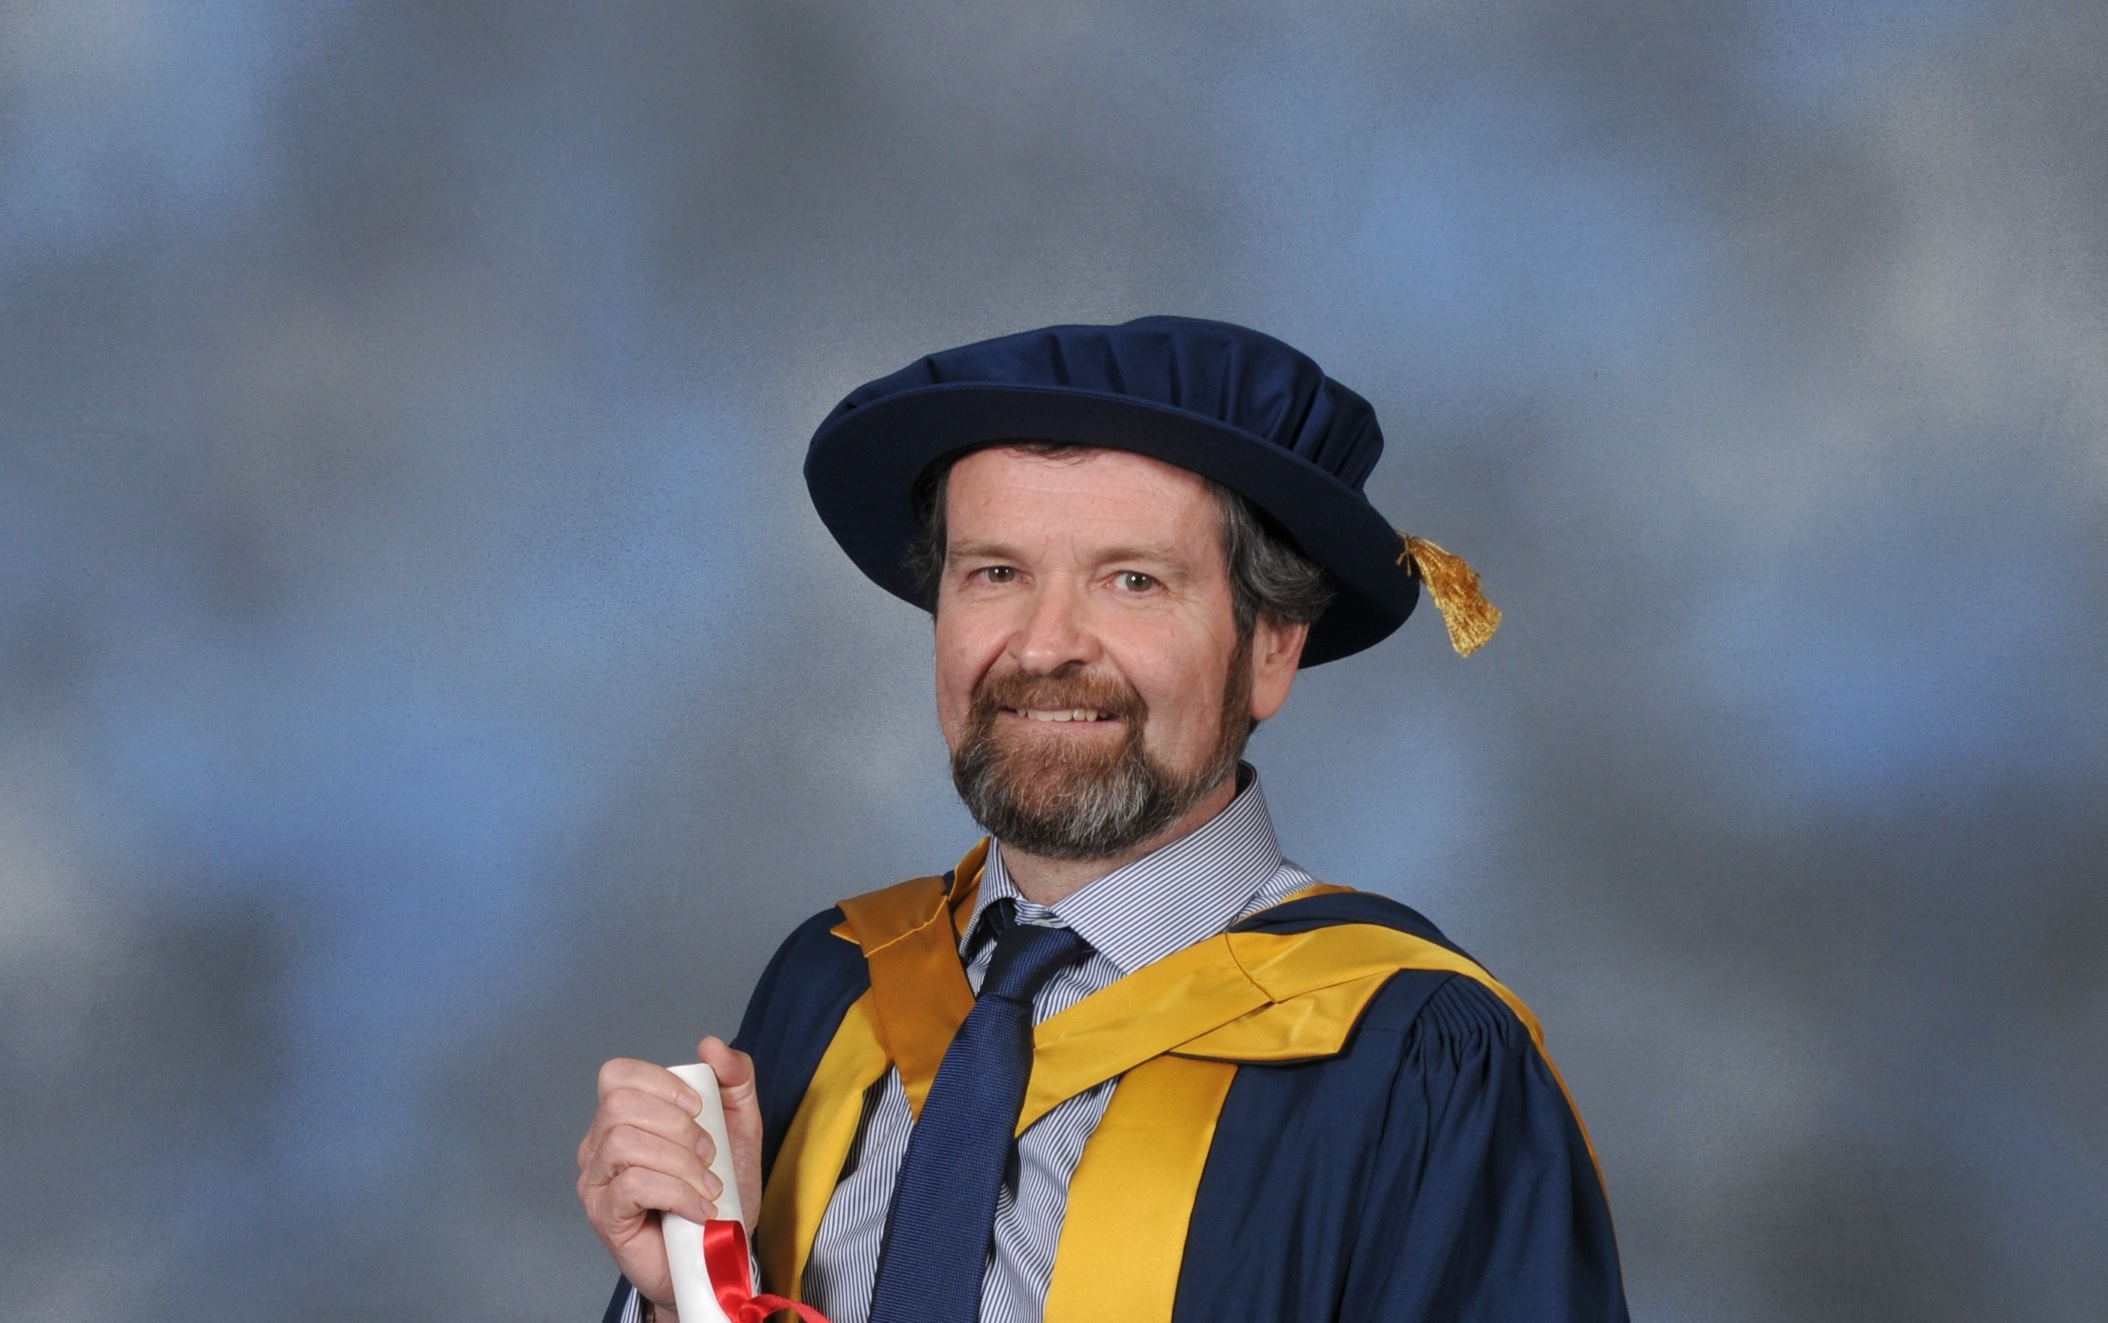 A picture of Michael Lamb holding his honorary degree